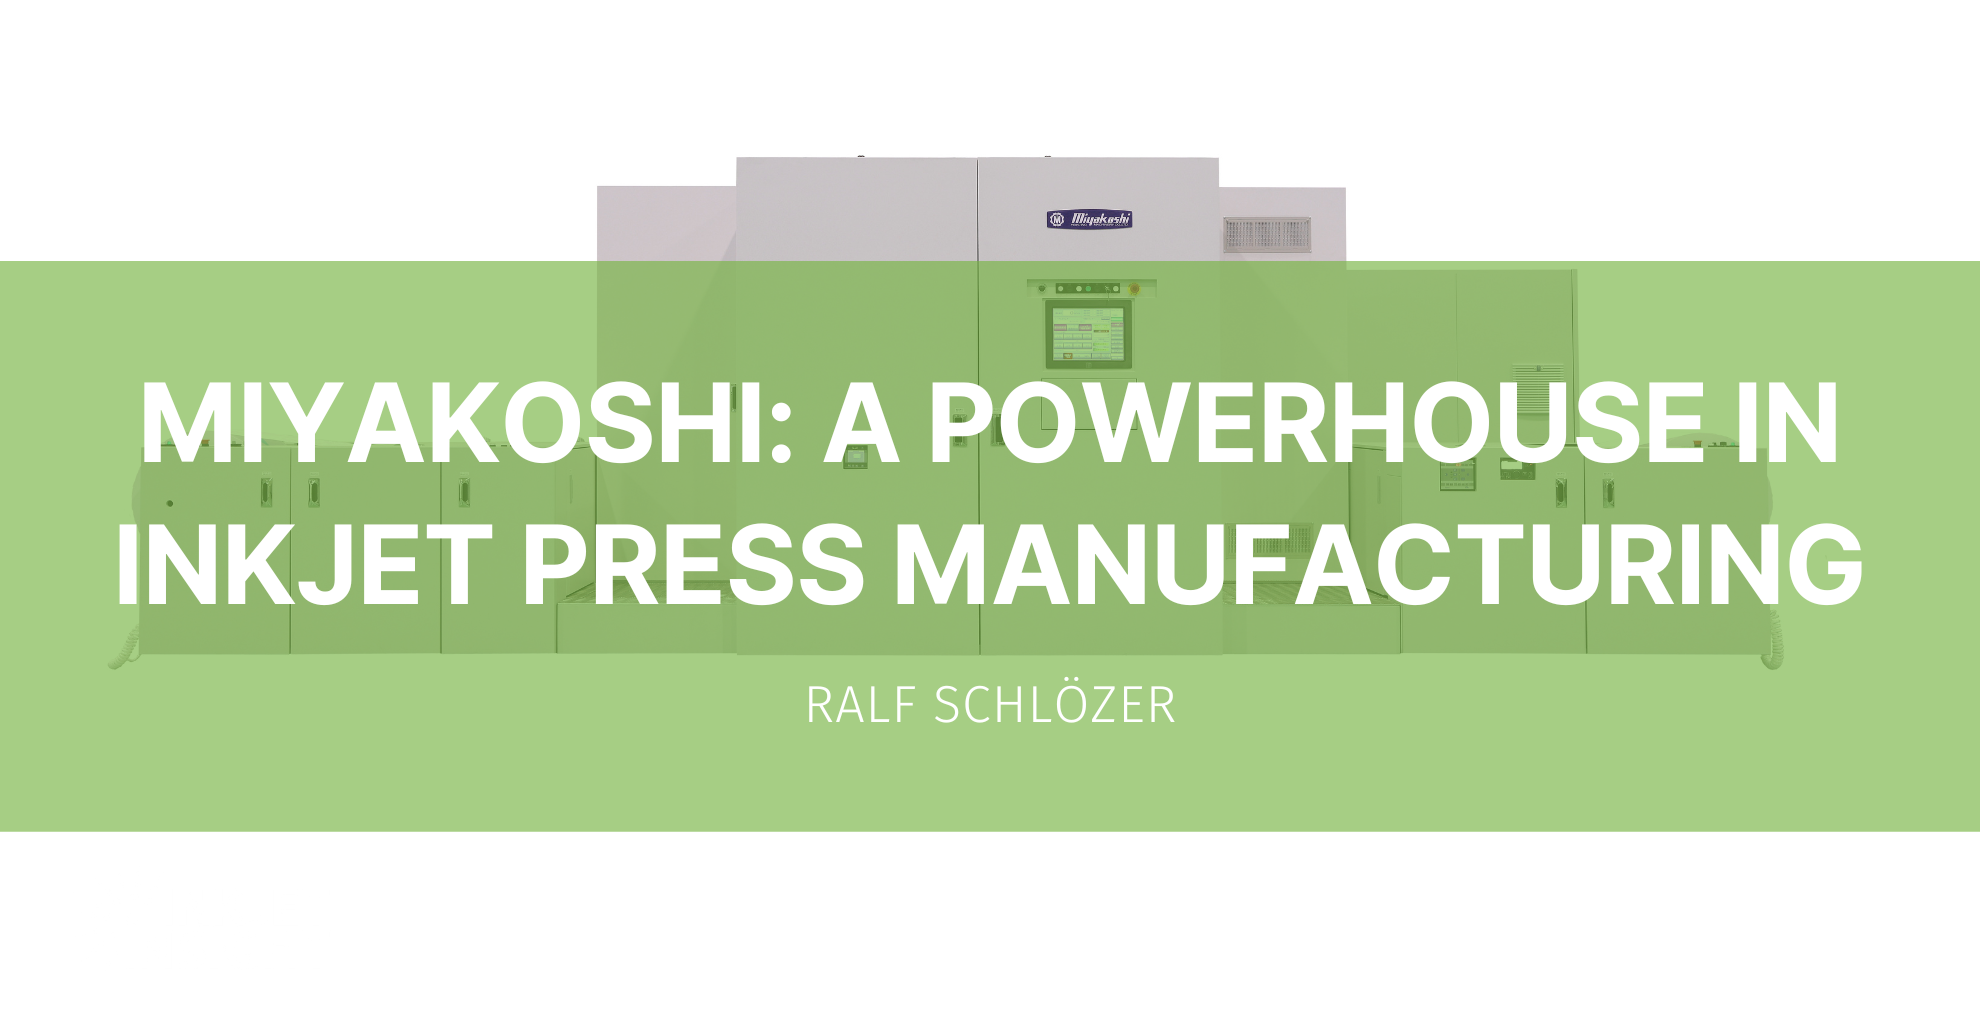 Featured image for “Miyakoshi: a powerhouse in inkjet press manufacturing”